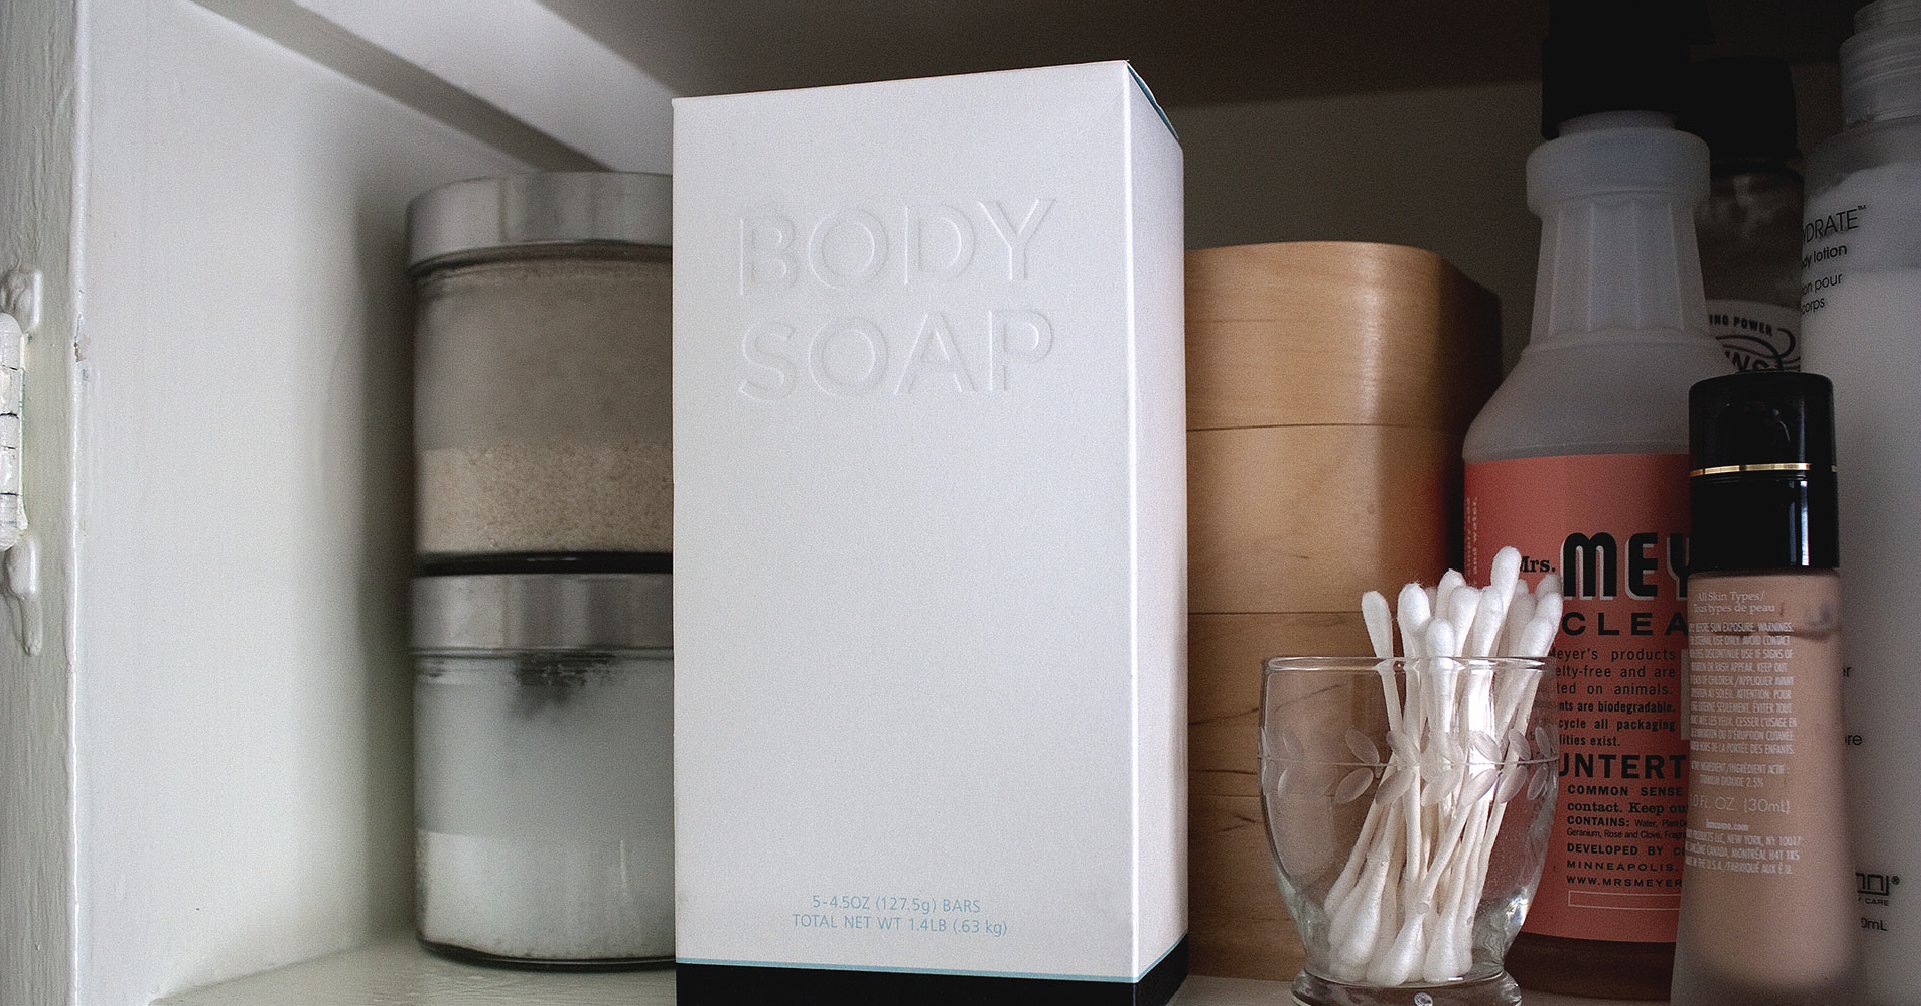 Plain white rectangular paper box that reads “Body Soap” in embossed lettering, sitting on a shelf in front of bathroom supplies and beauty products